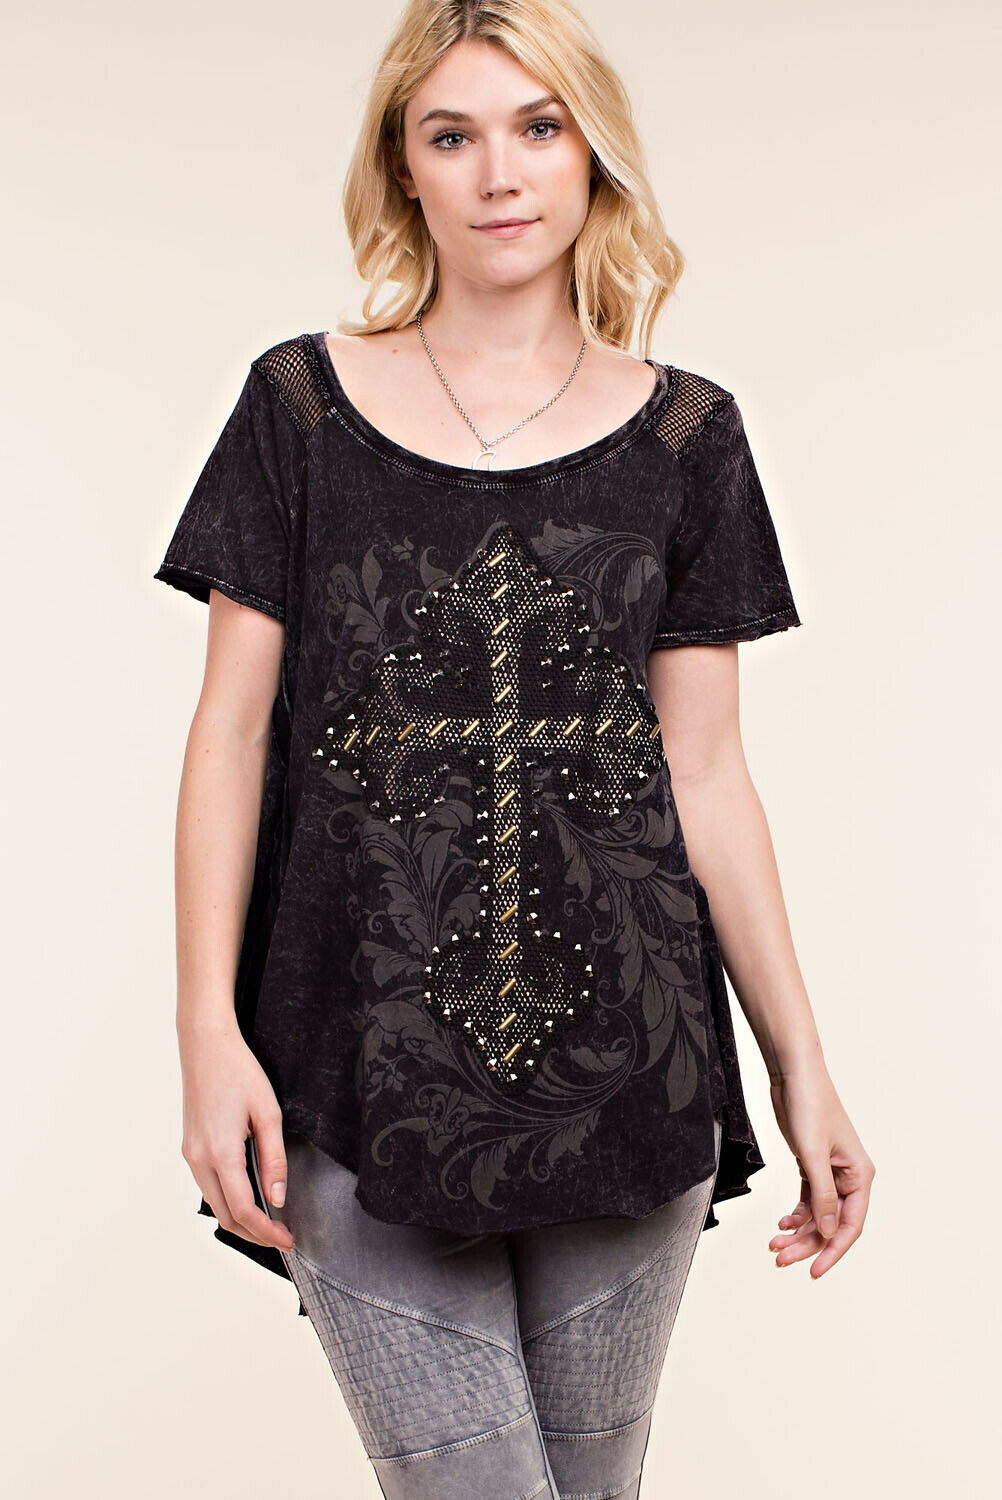 Classic Long Black Tee with Studded Cross by Vocal  Apparel S, M, L, USA